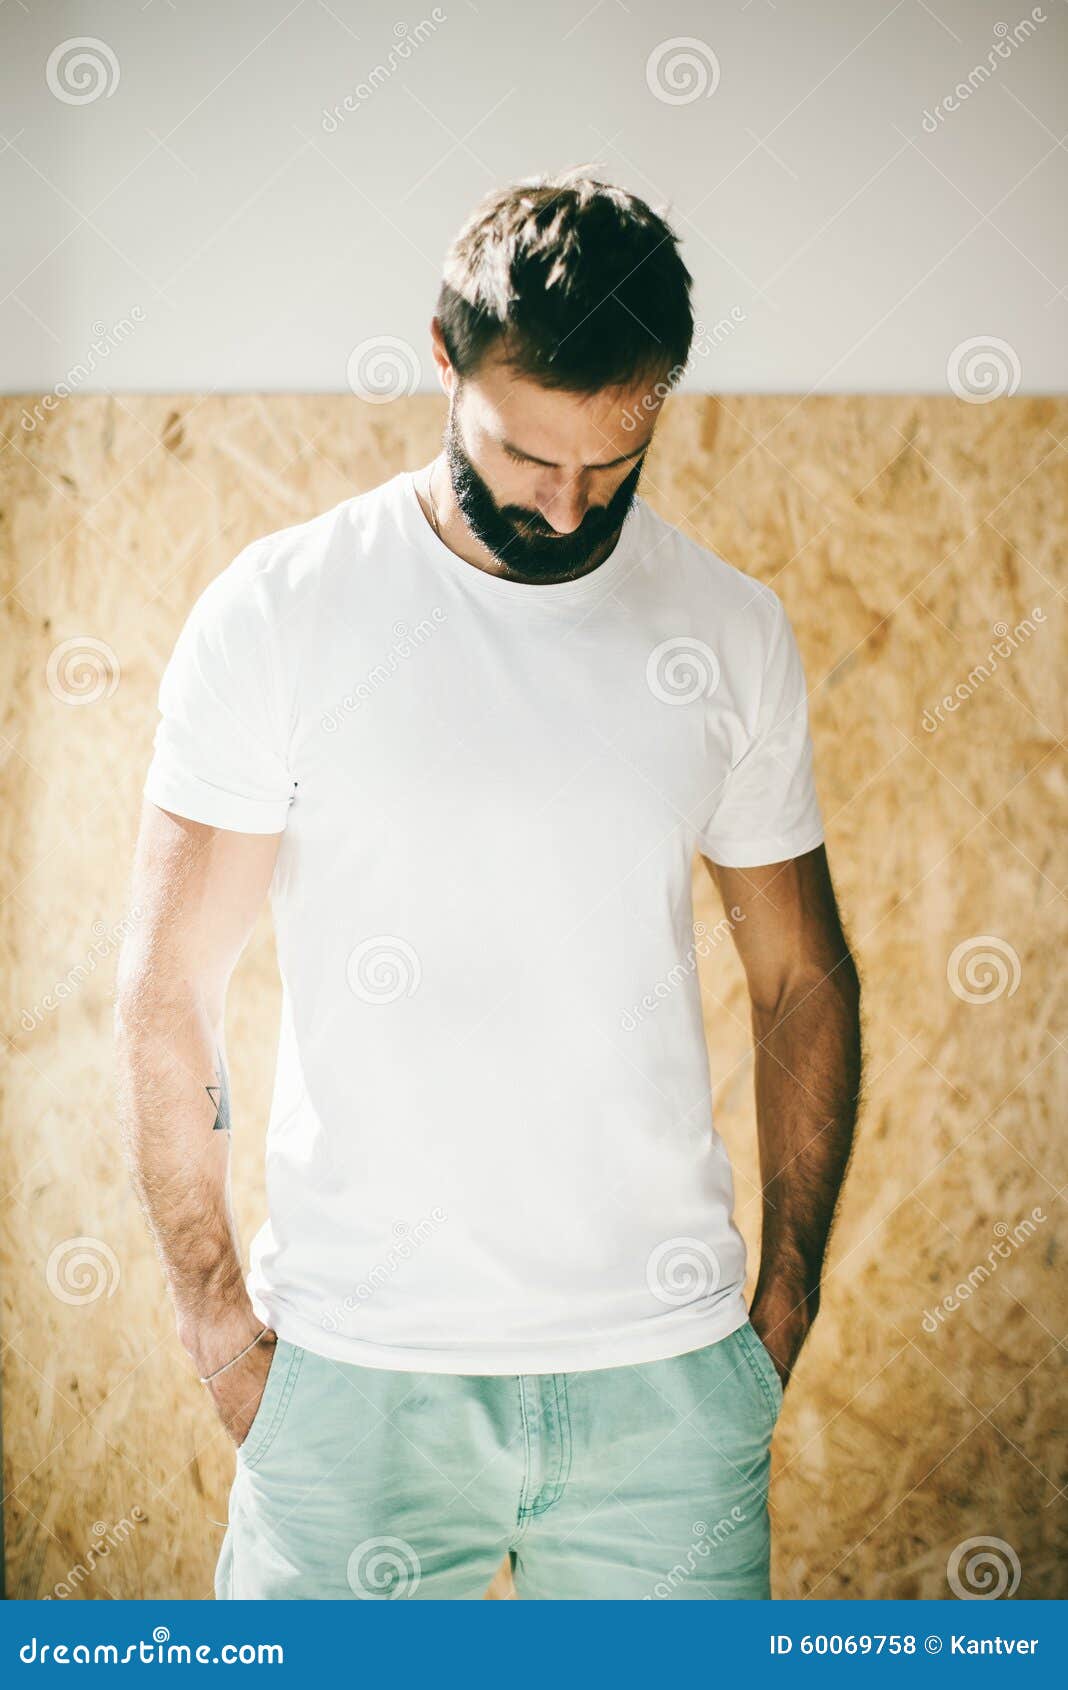 mockup of a bearded man wearing white tshirt and